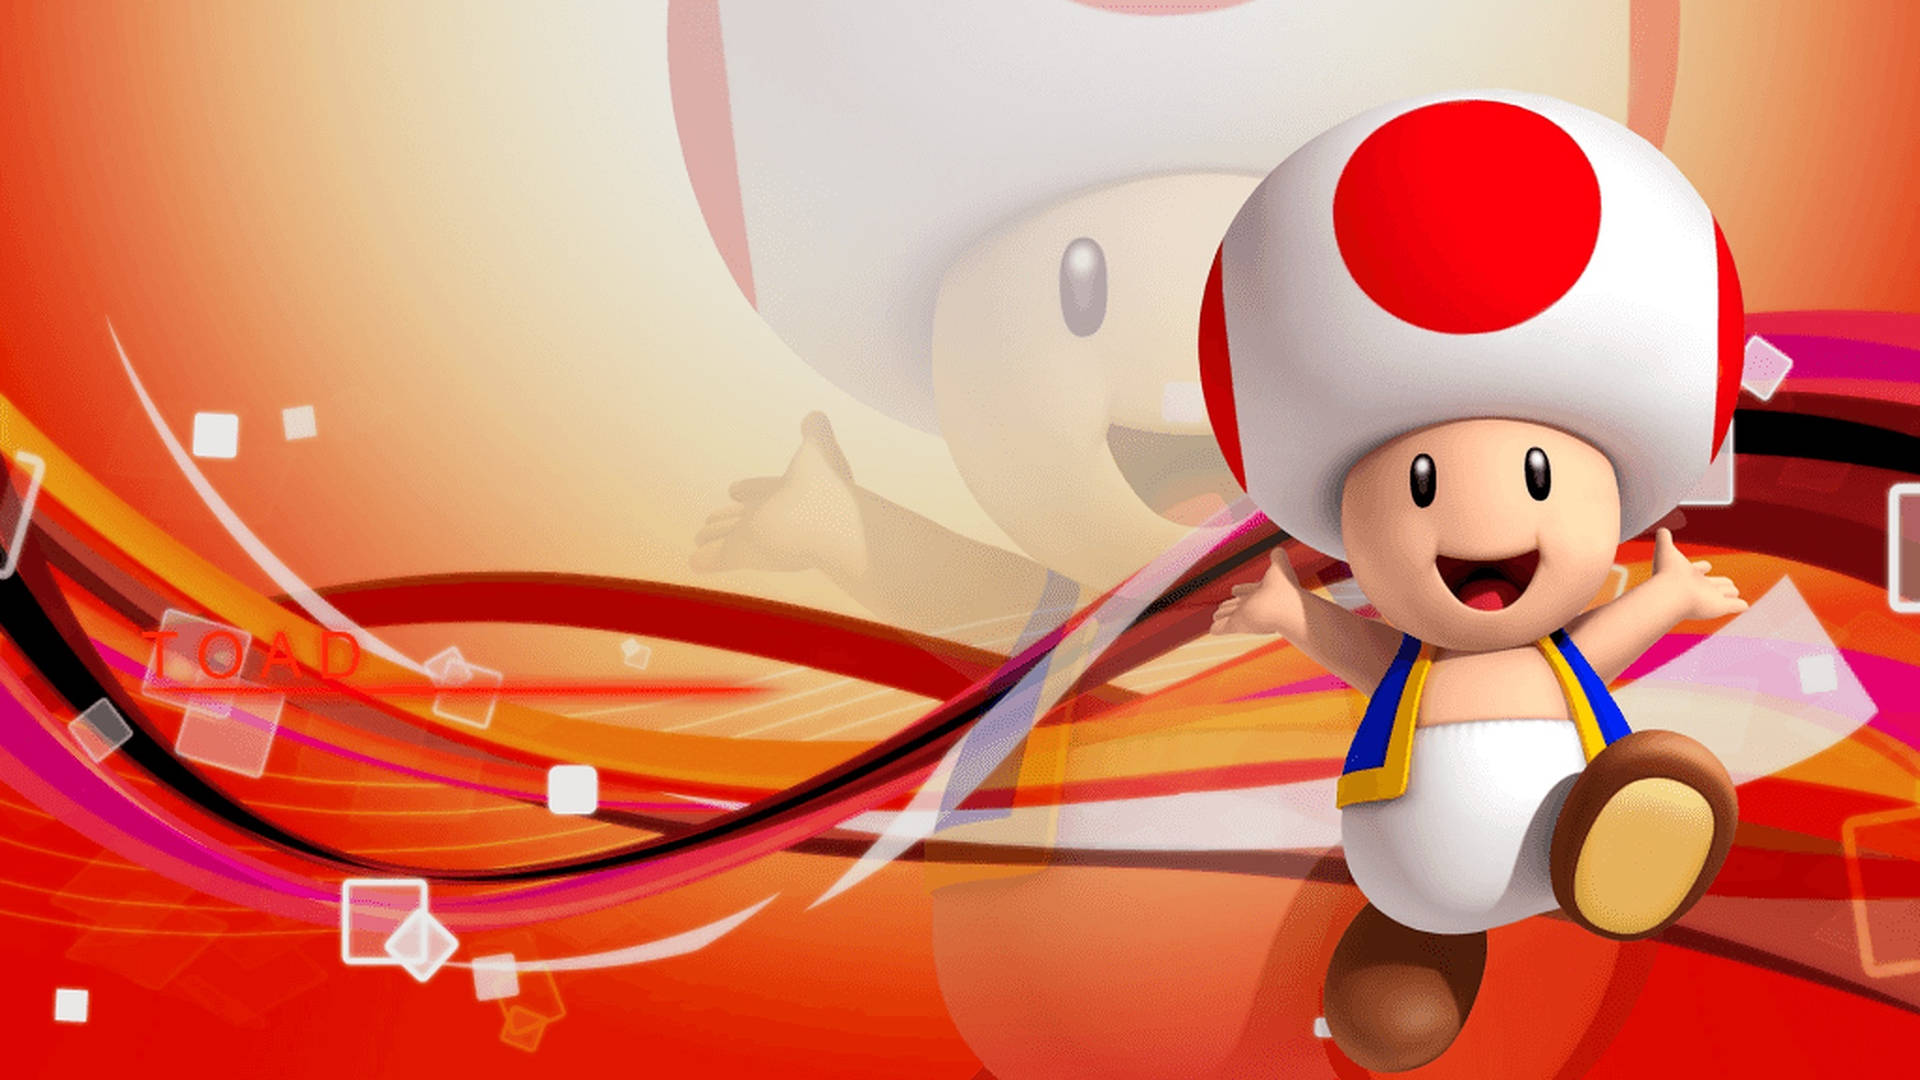 Nintendo Character Toad Poster